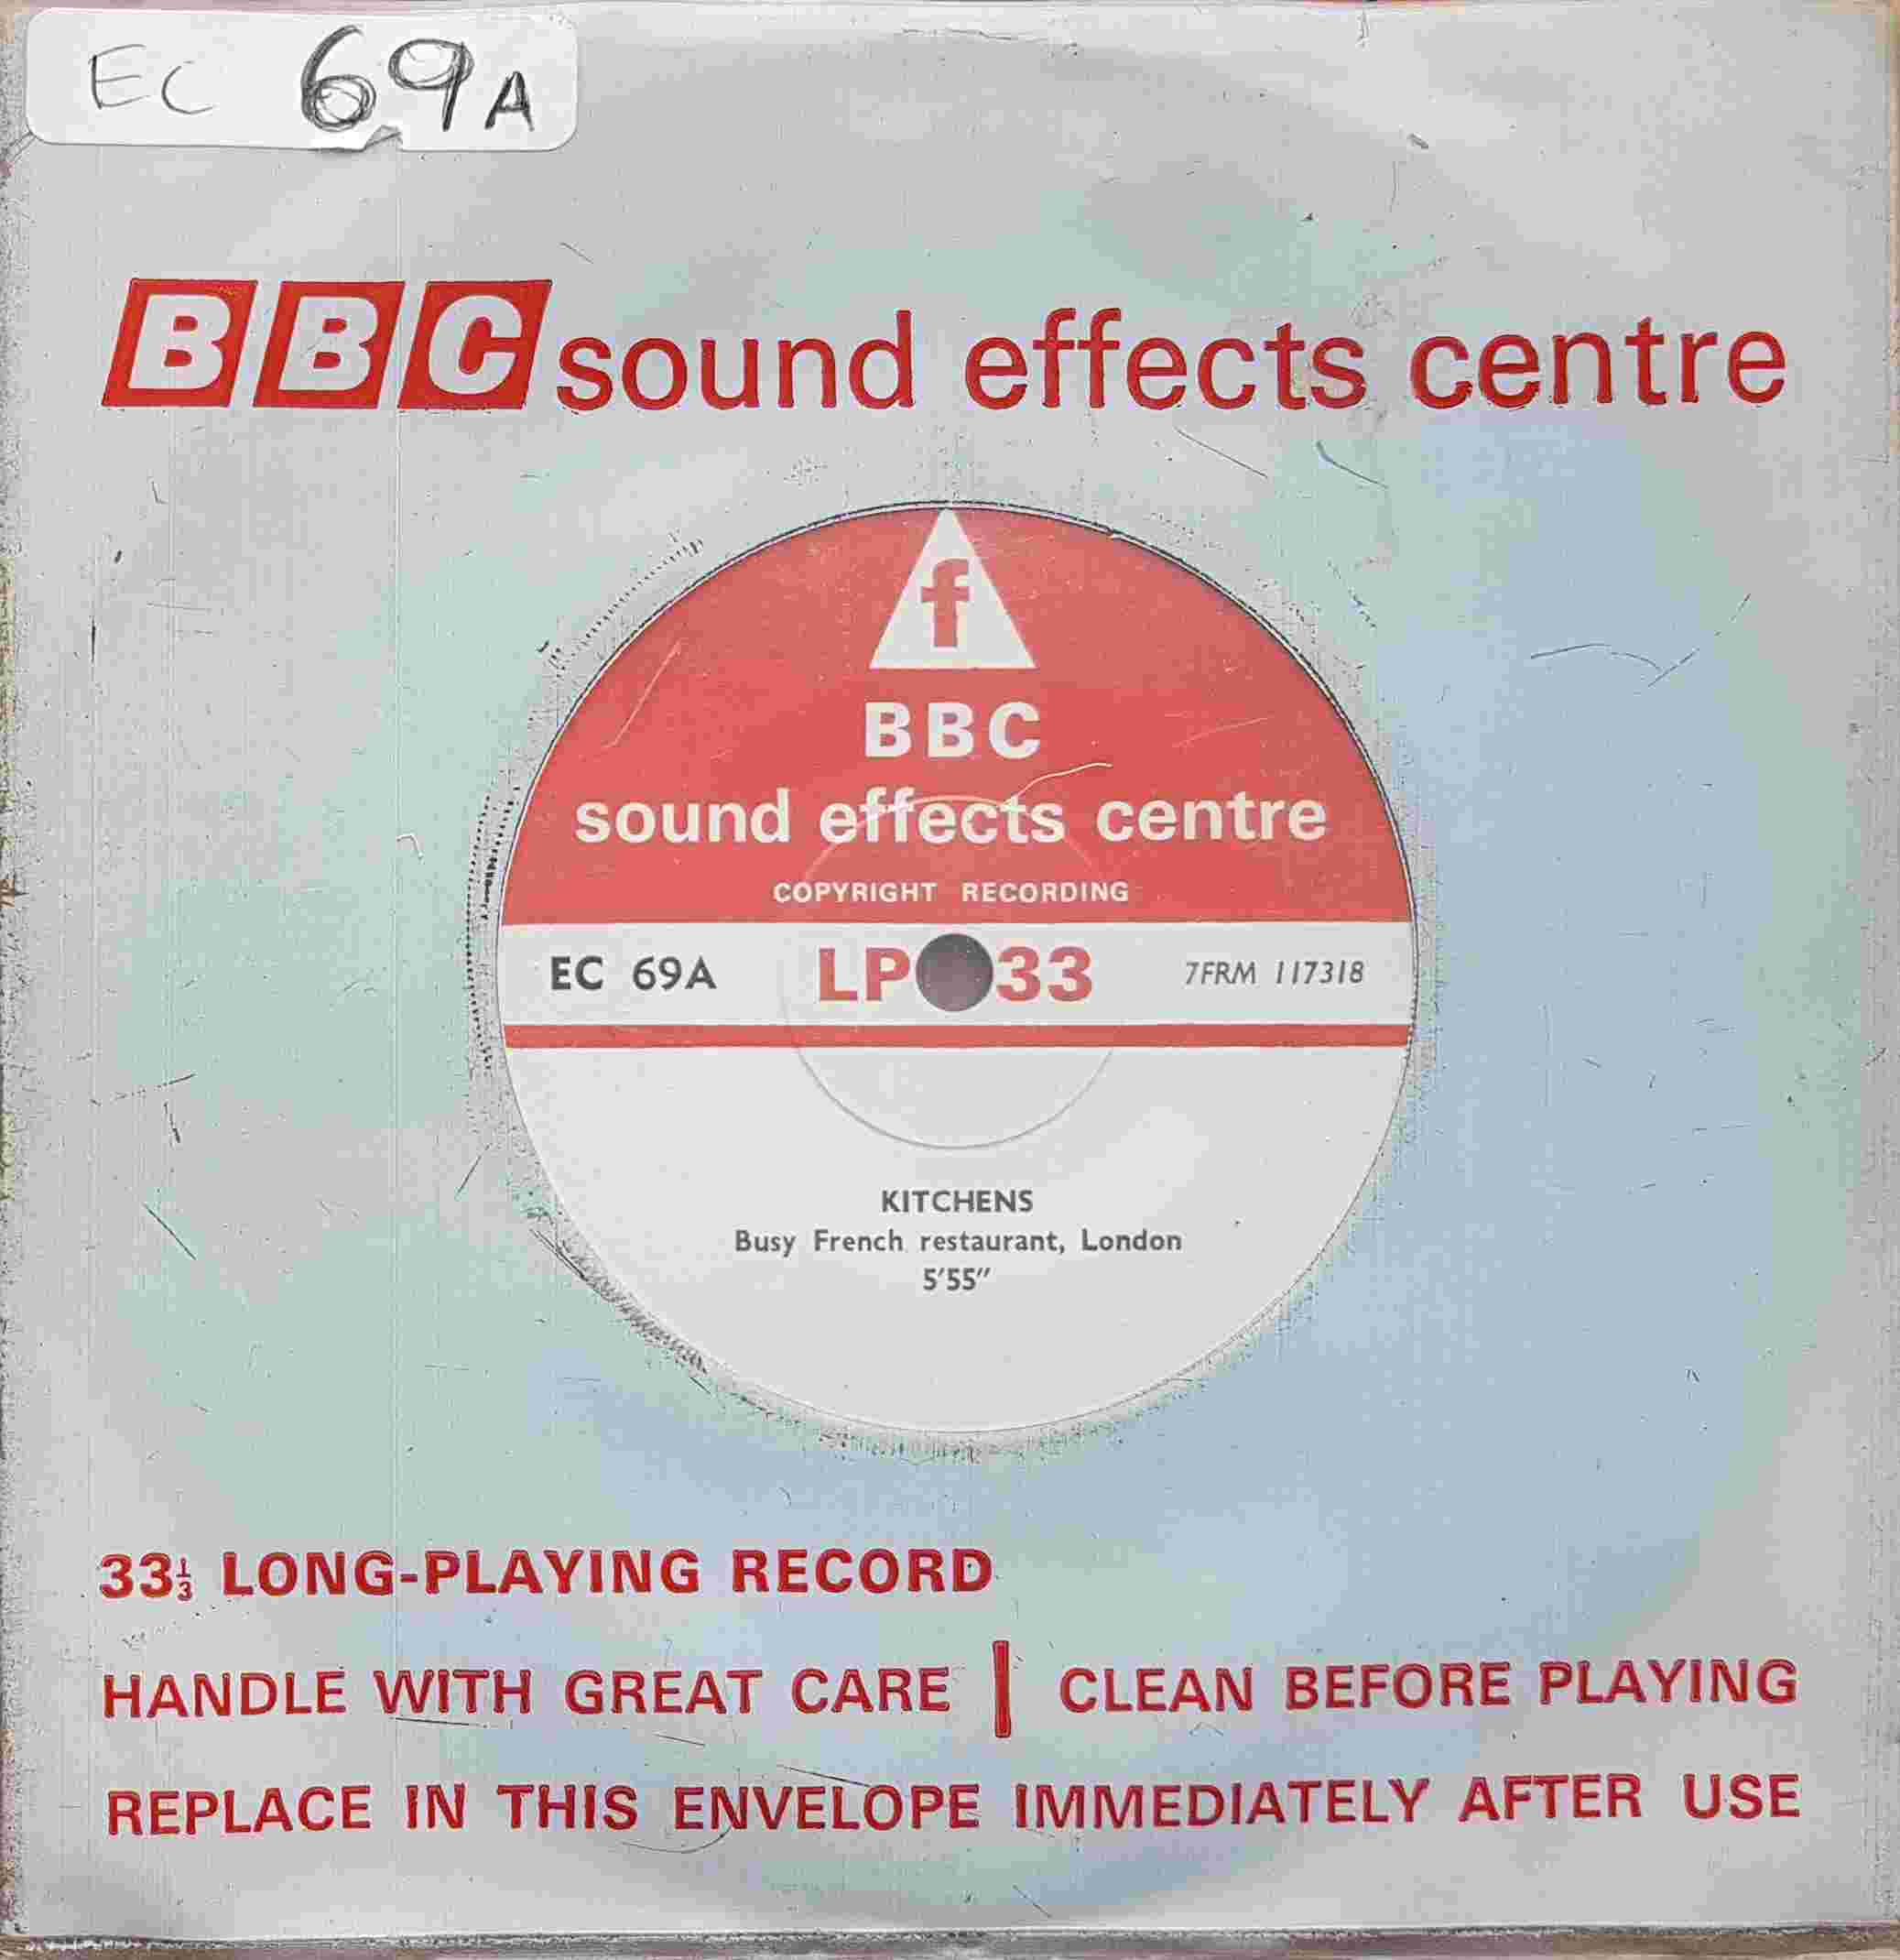 Picture of EC 69A Kitchens by artist Not registered from the BBC singles - Records and Tapes library